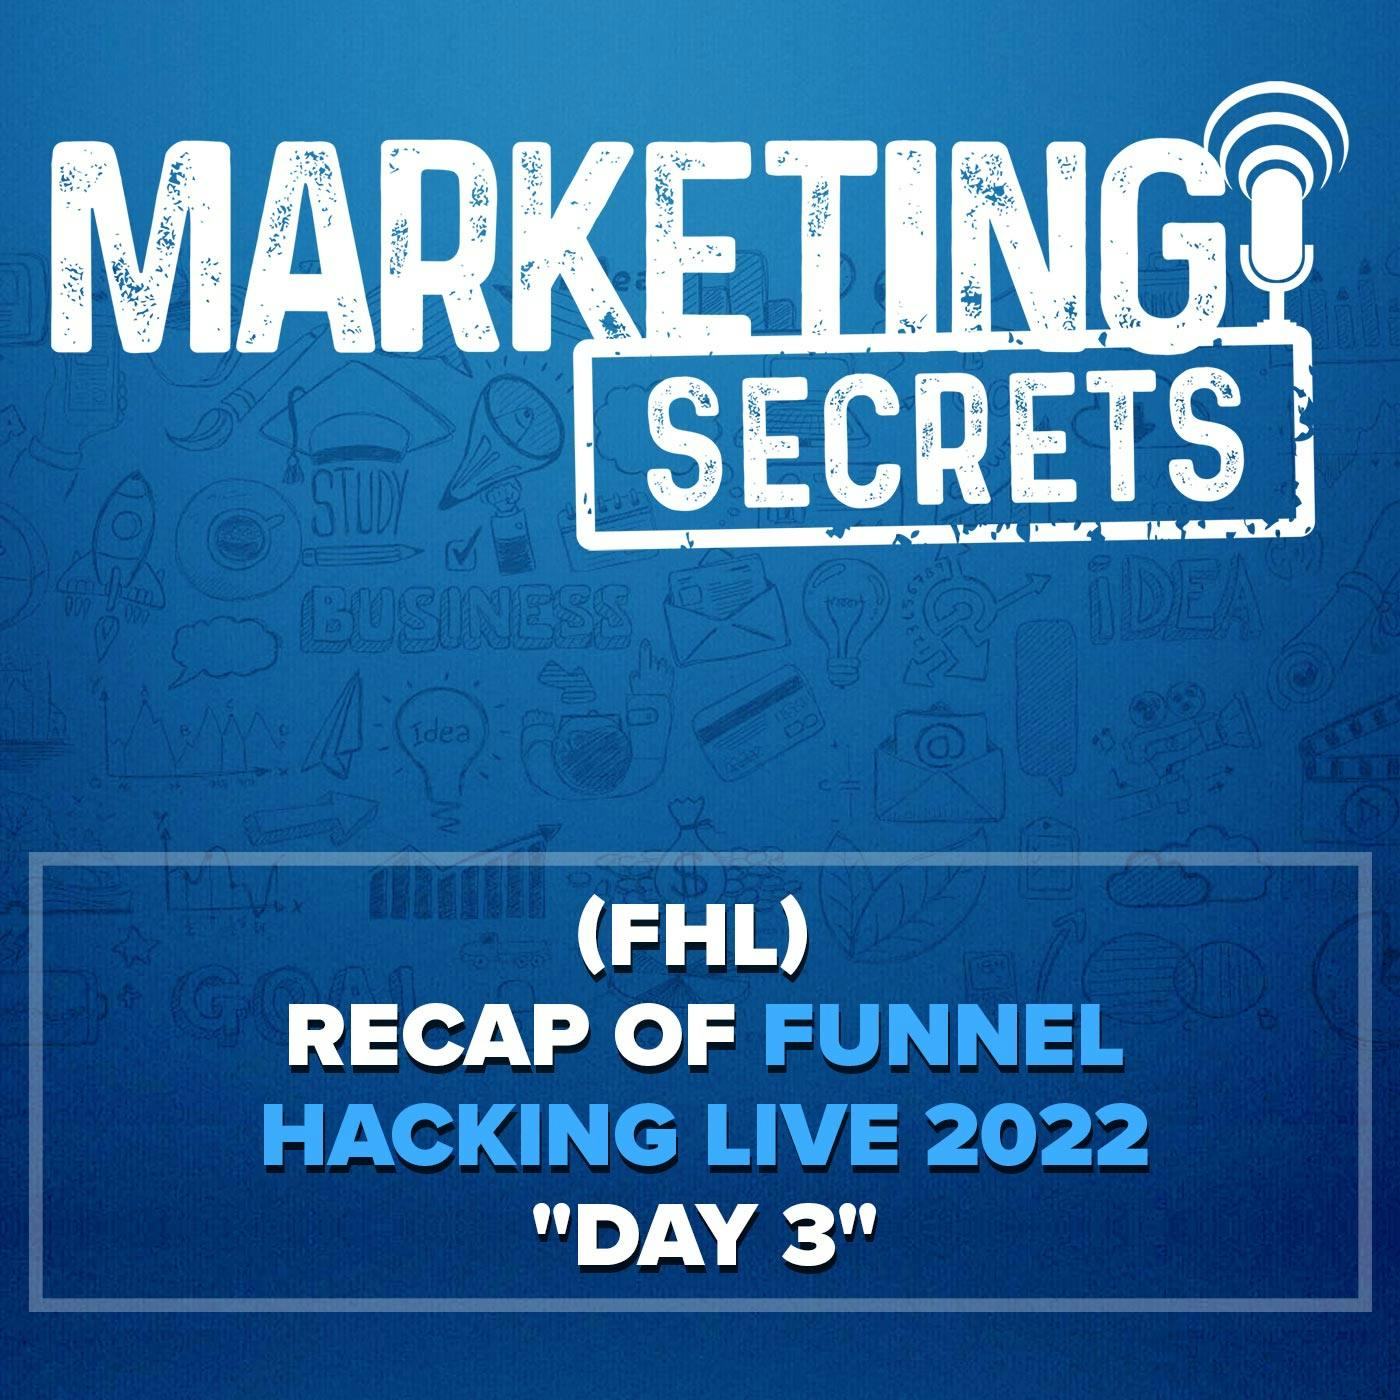 (FHL) Recap of Funnel Hacking Live 2022 "Day 3"